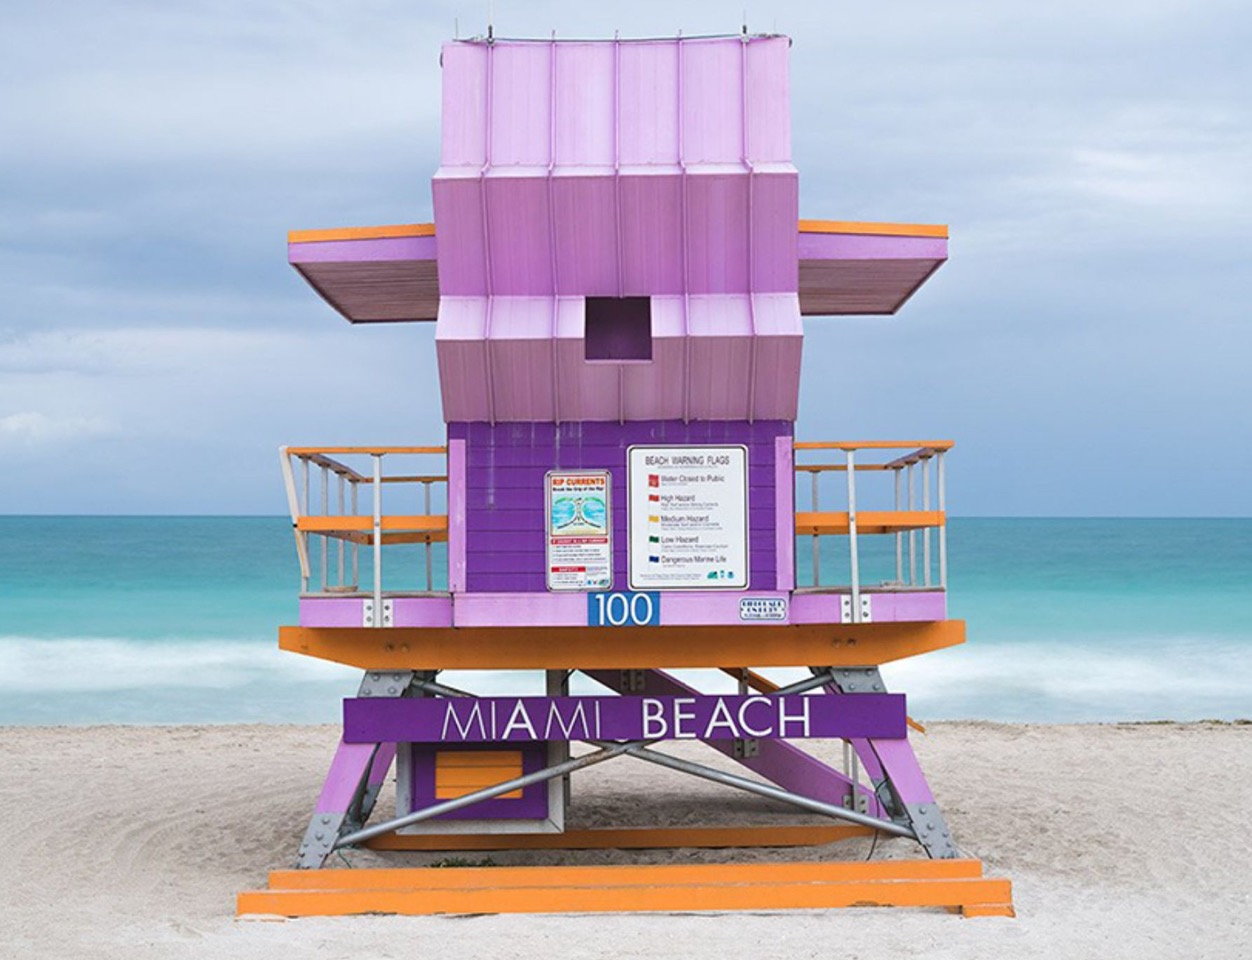 Vibrant purple Miami Beach lifeguard tower featured in Tommy Kwak's new book 